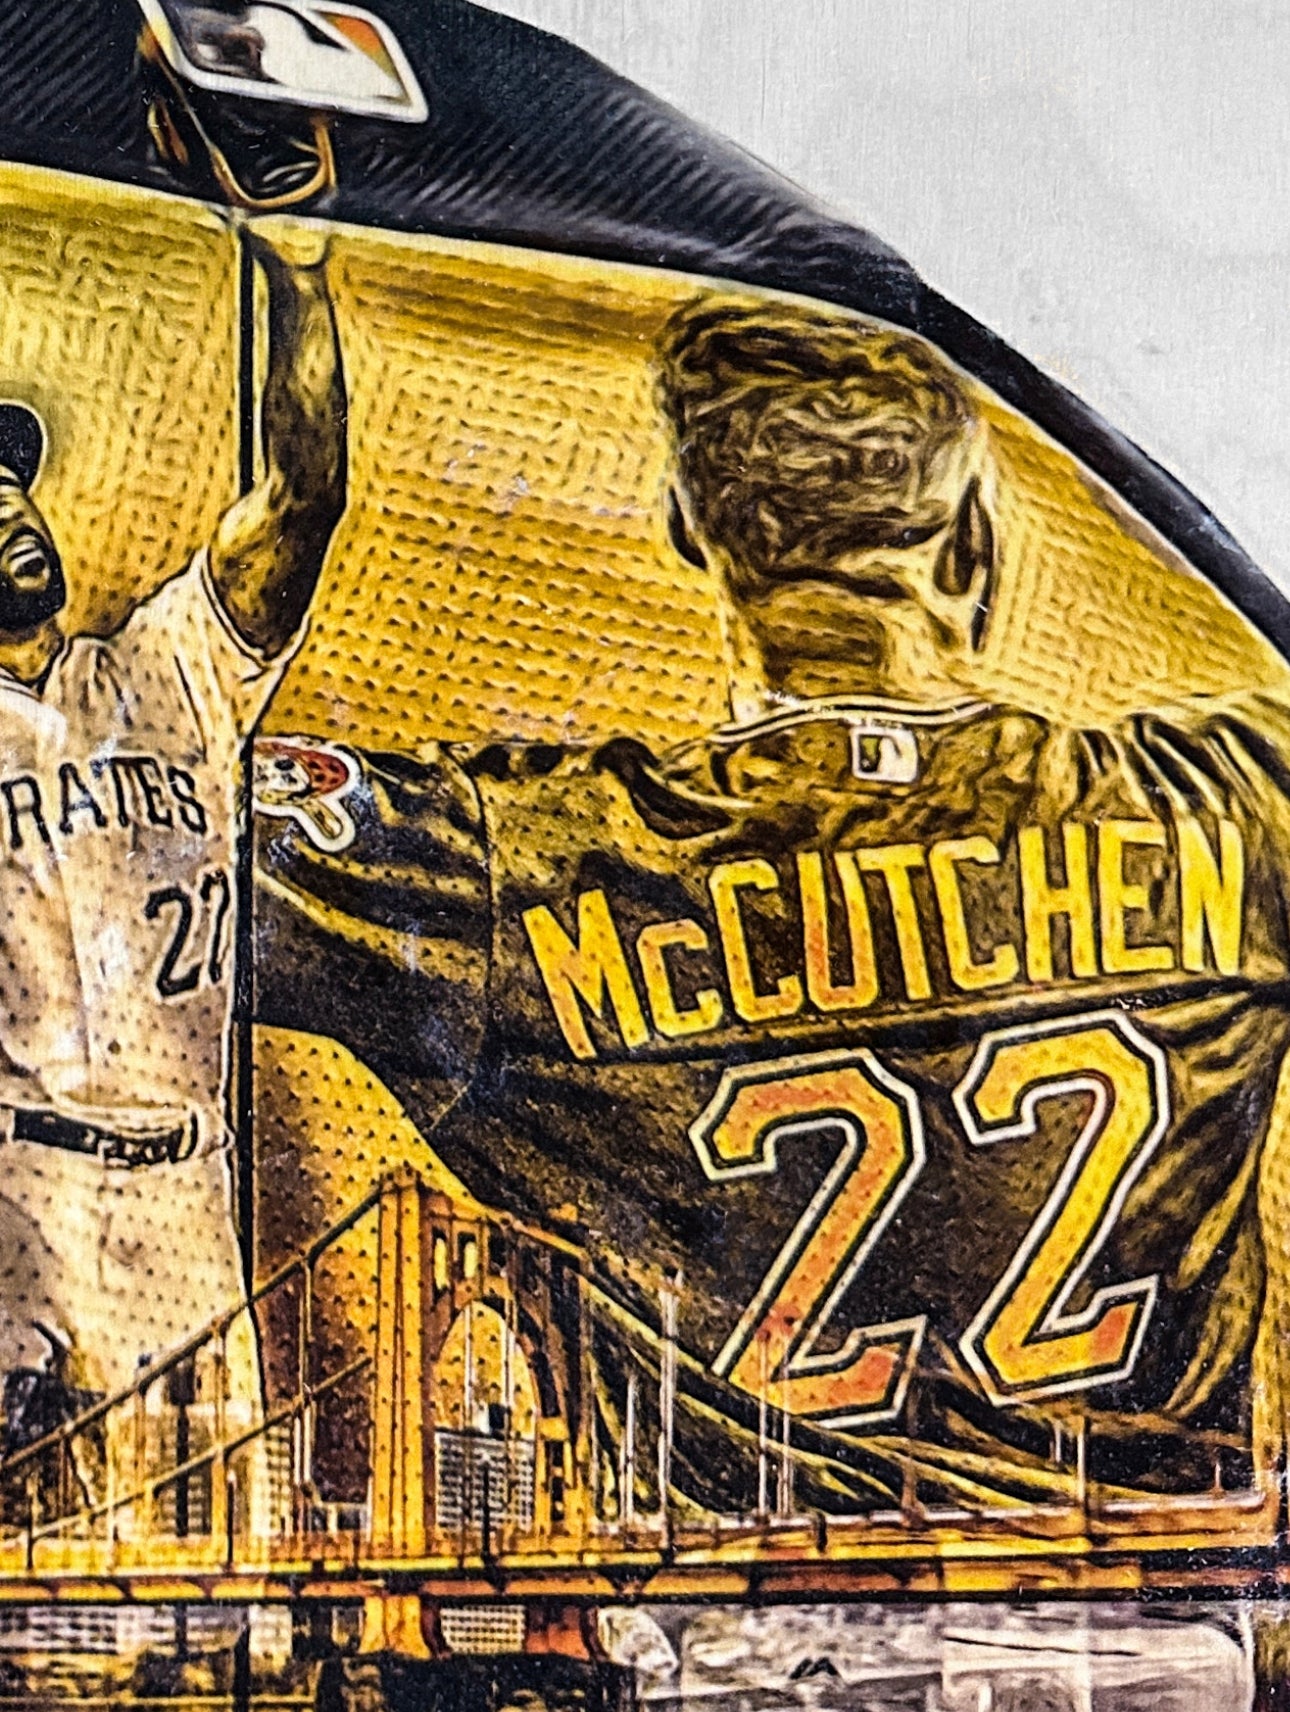 "Cutch" (Andrew McCutchen) Pittsburgh Pirates - Officially Licensed MLB Print - Limited Release /500